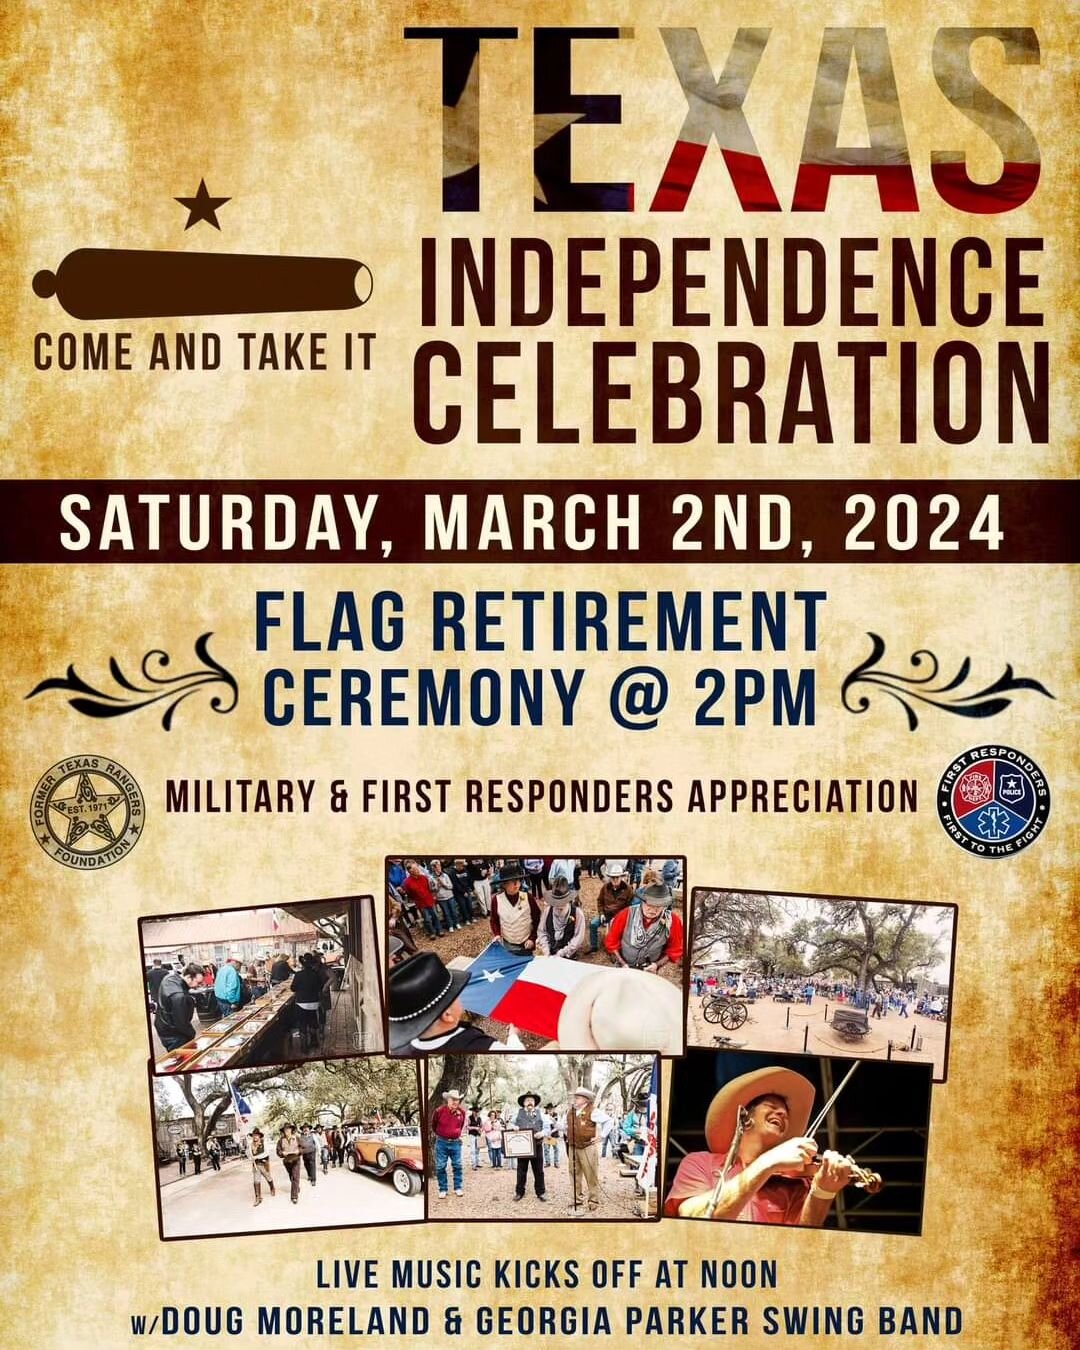 💥Come out to Luckenbach Texas on March 2, 2024 and help us celebrate the Texas Independence and view our Official Texas Flag retirement ceremony w/Former Texas Rangers.

#Texas #LuckenbachTexas